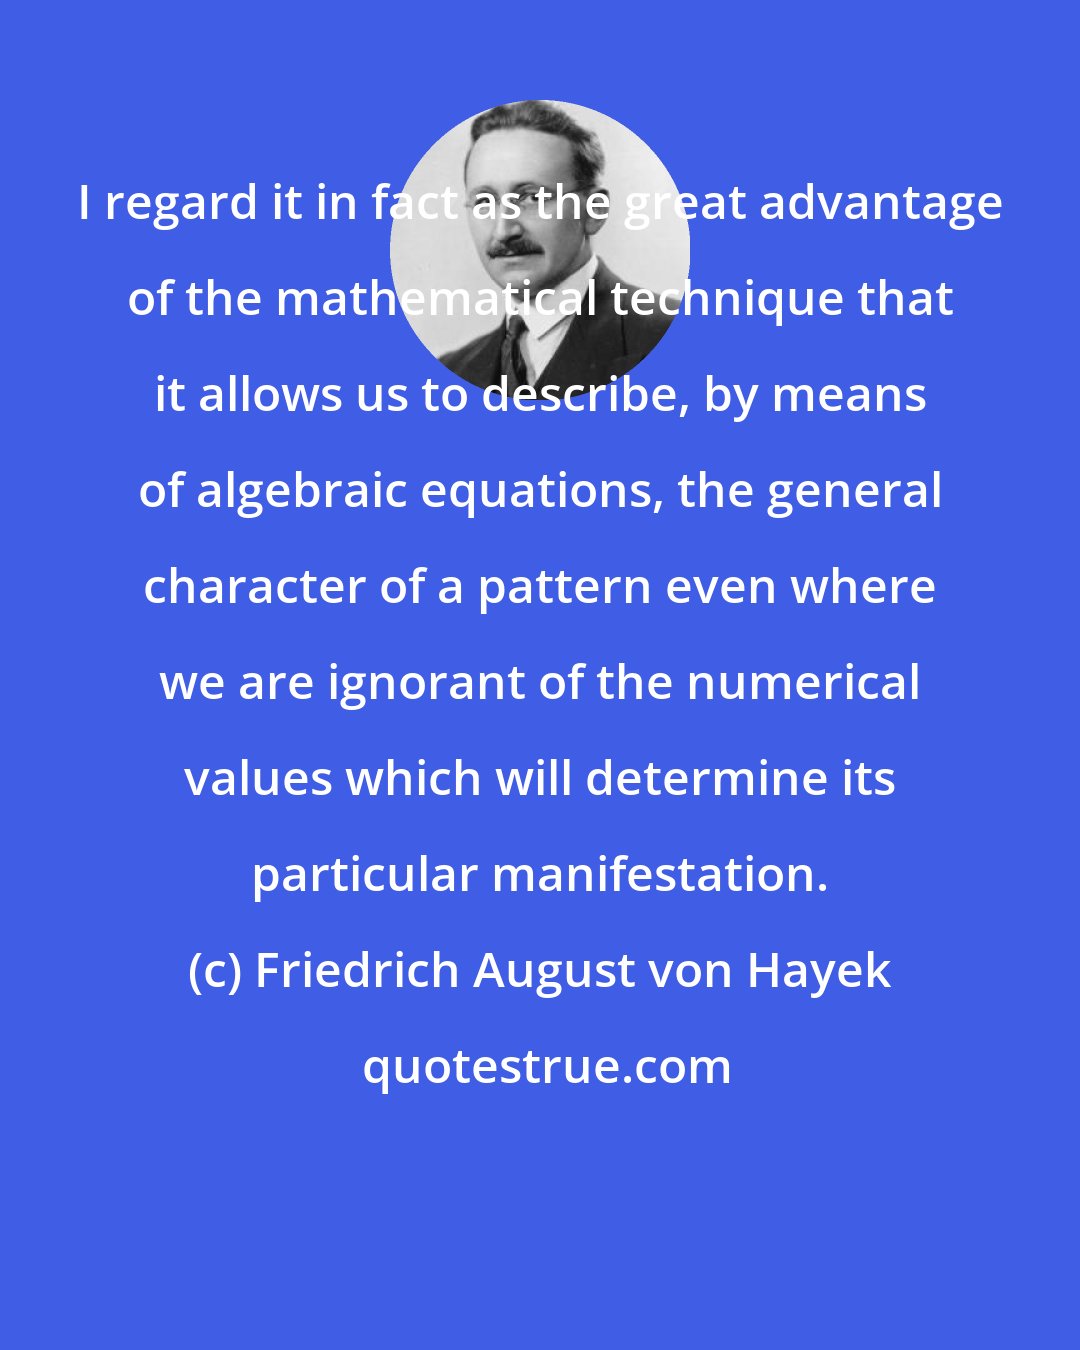 Friedrich August von Hayek: I regard it in fact as the great advantage of the mathematical technique that it allows us to describe, by means of algebraic equations, the general character of a pattern even where we are ignorant of the numerical values which will determine its particular manifestation.